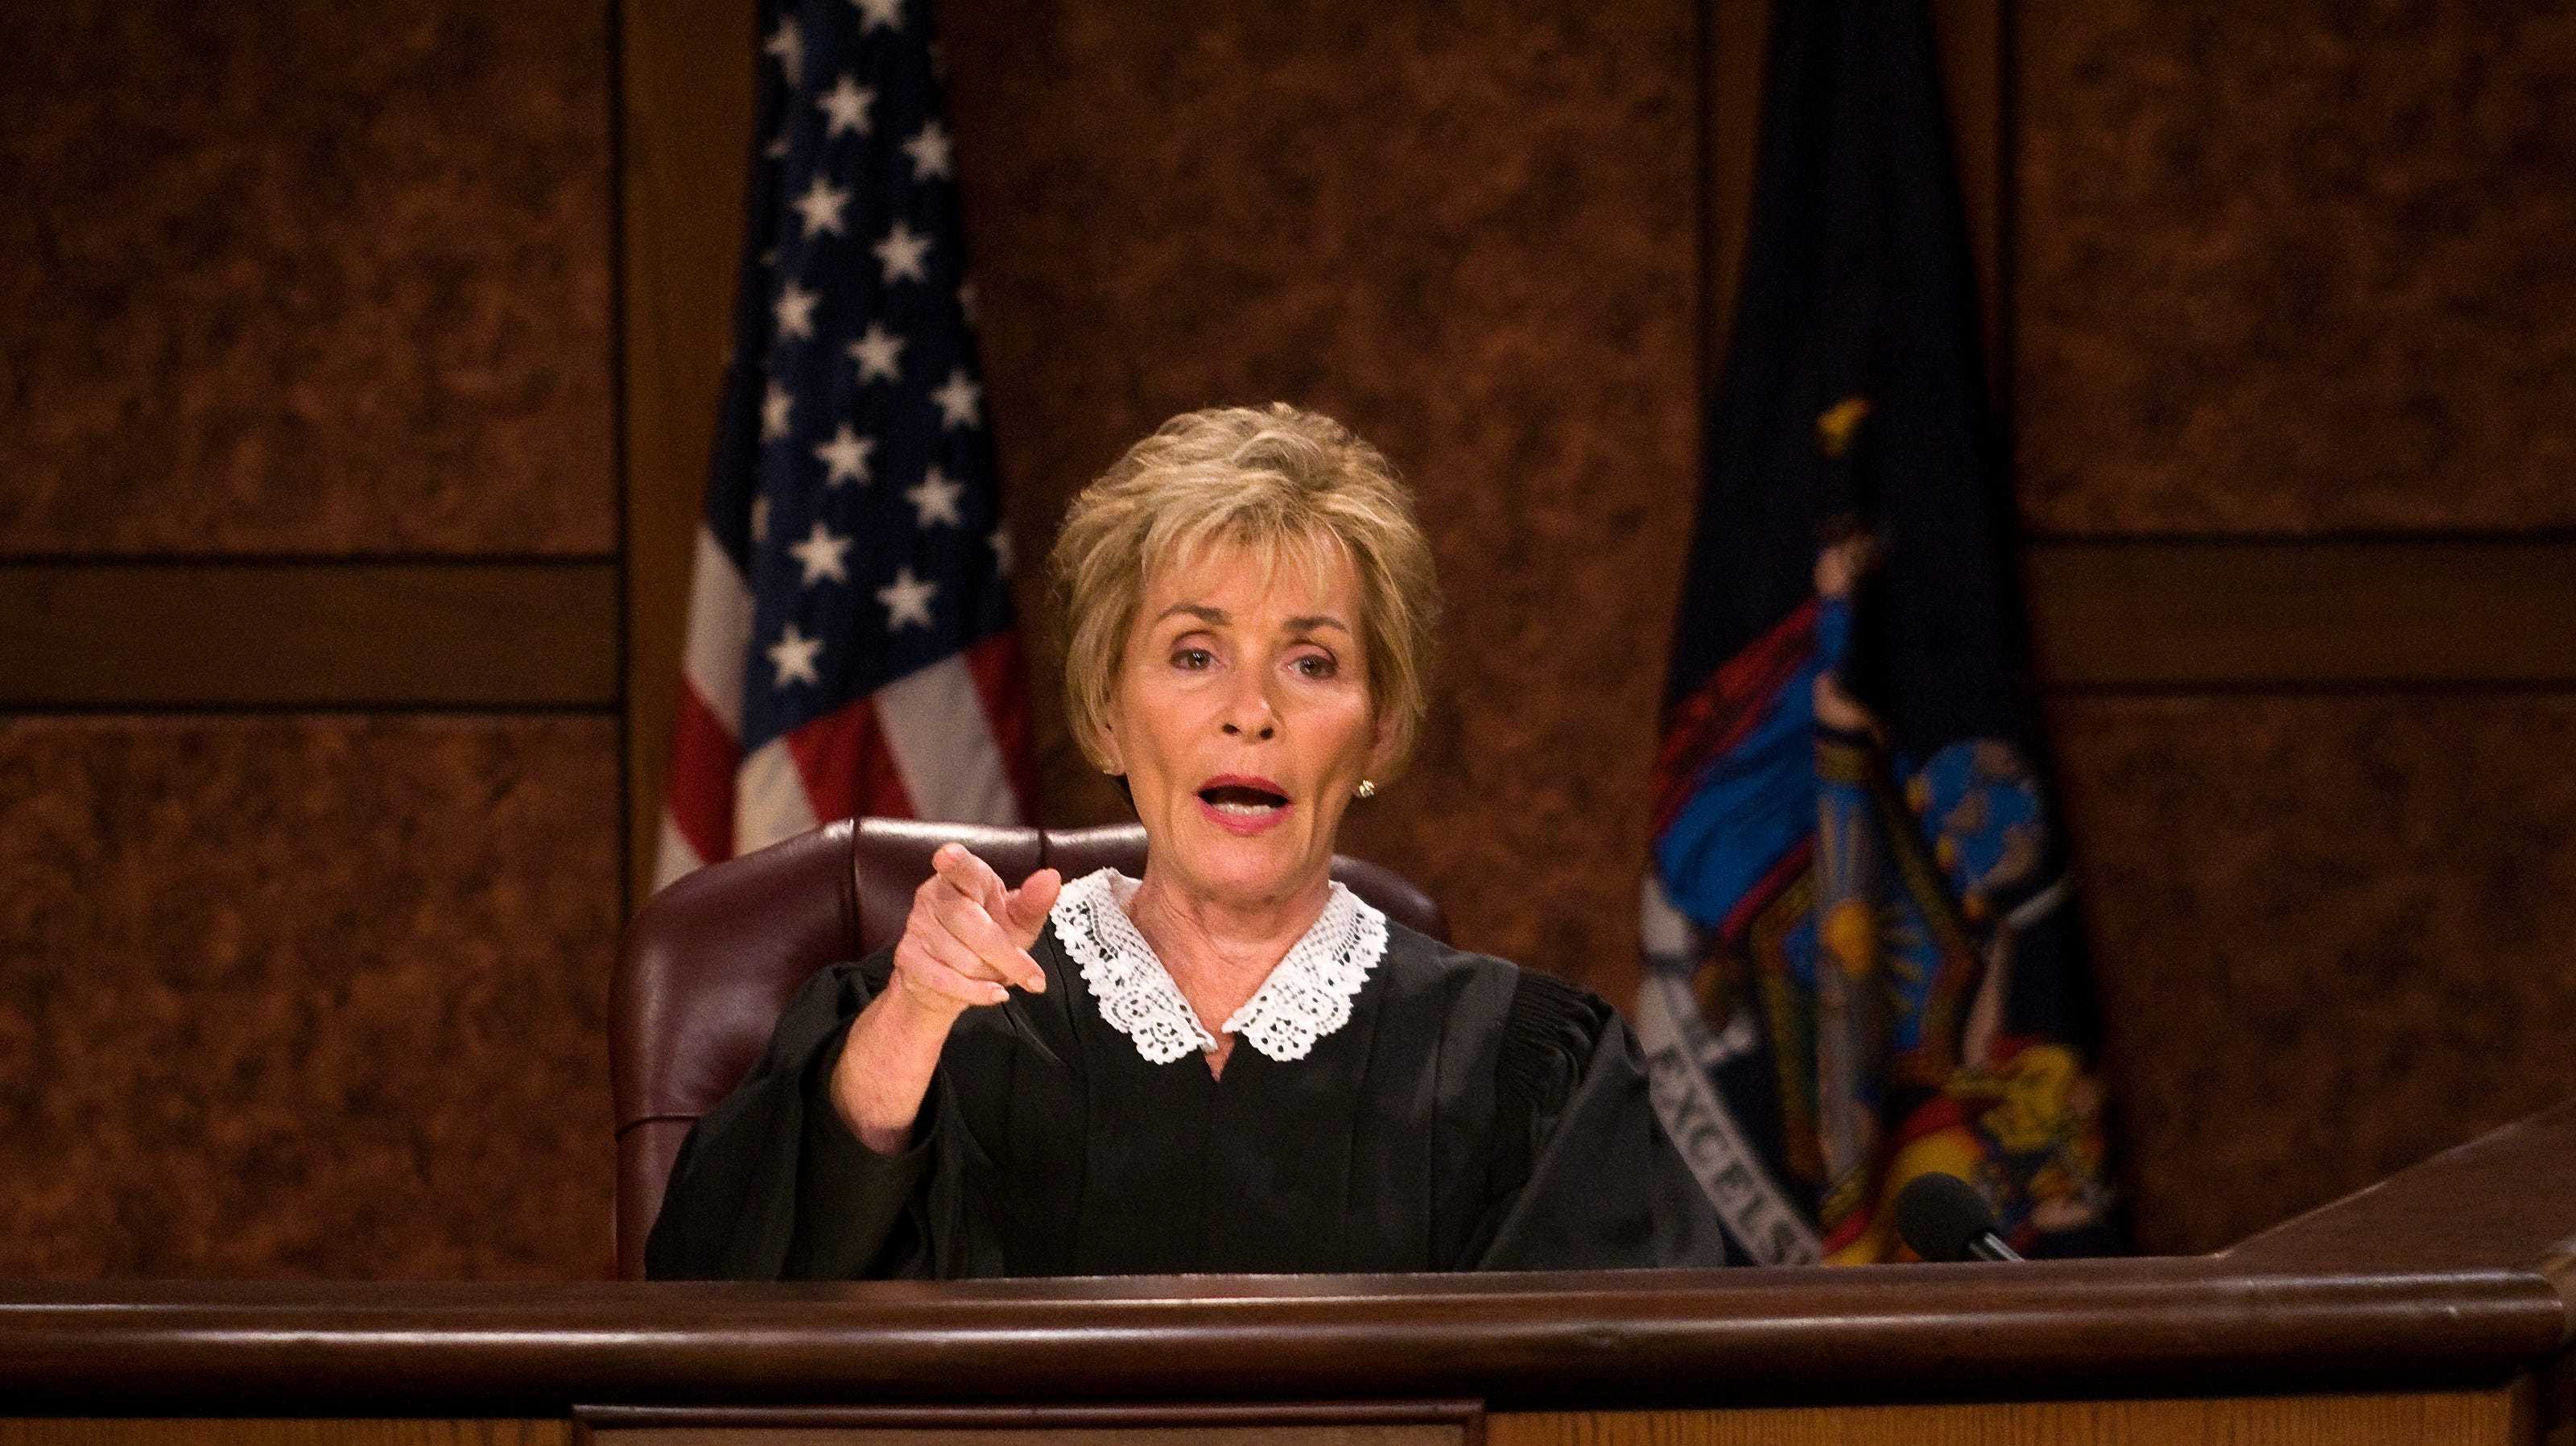 Judge Judy' will end after upcoming 25th season; star Judy Sheindlin a...